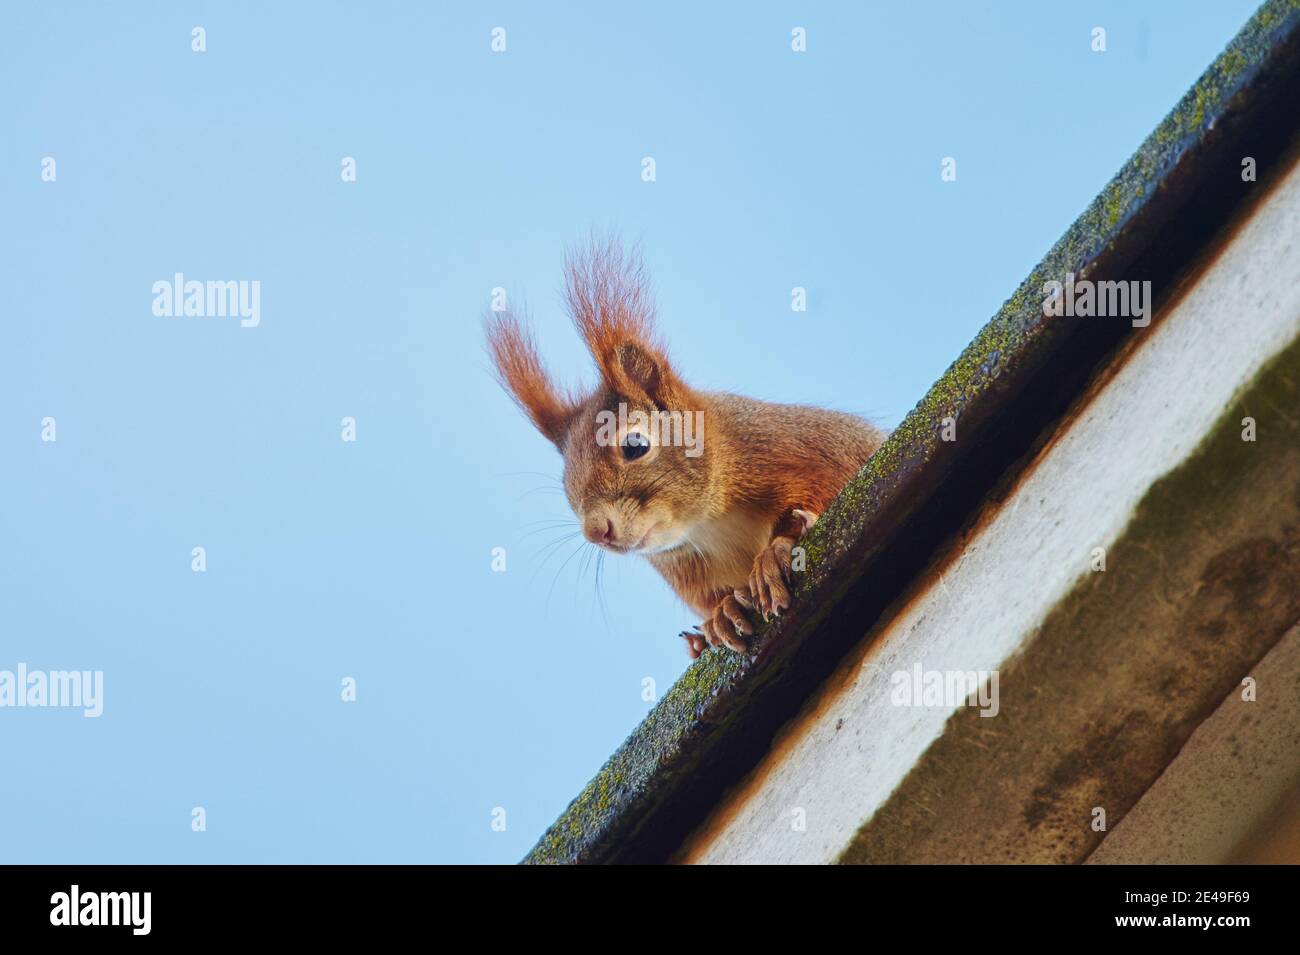 European red squirrel (Sciurus vulgaris) looks down from a roof, Bavaria, Germany Stock Photo